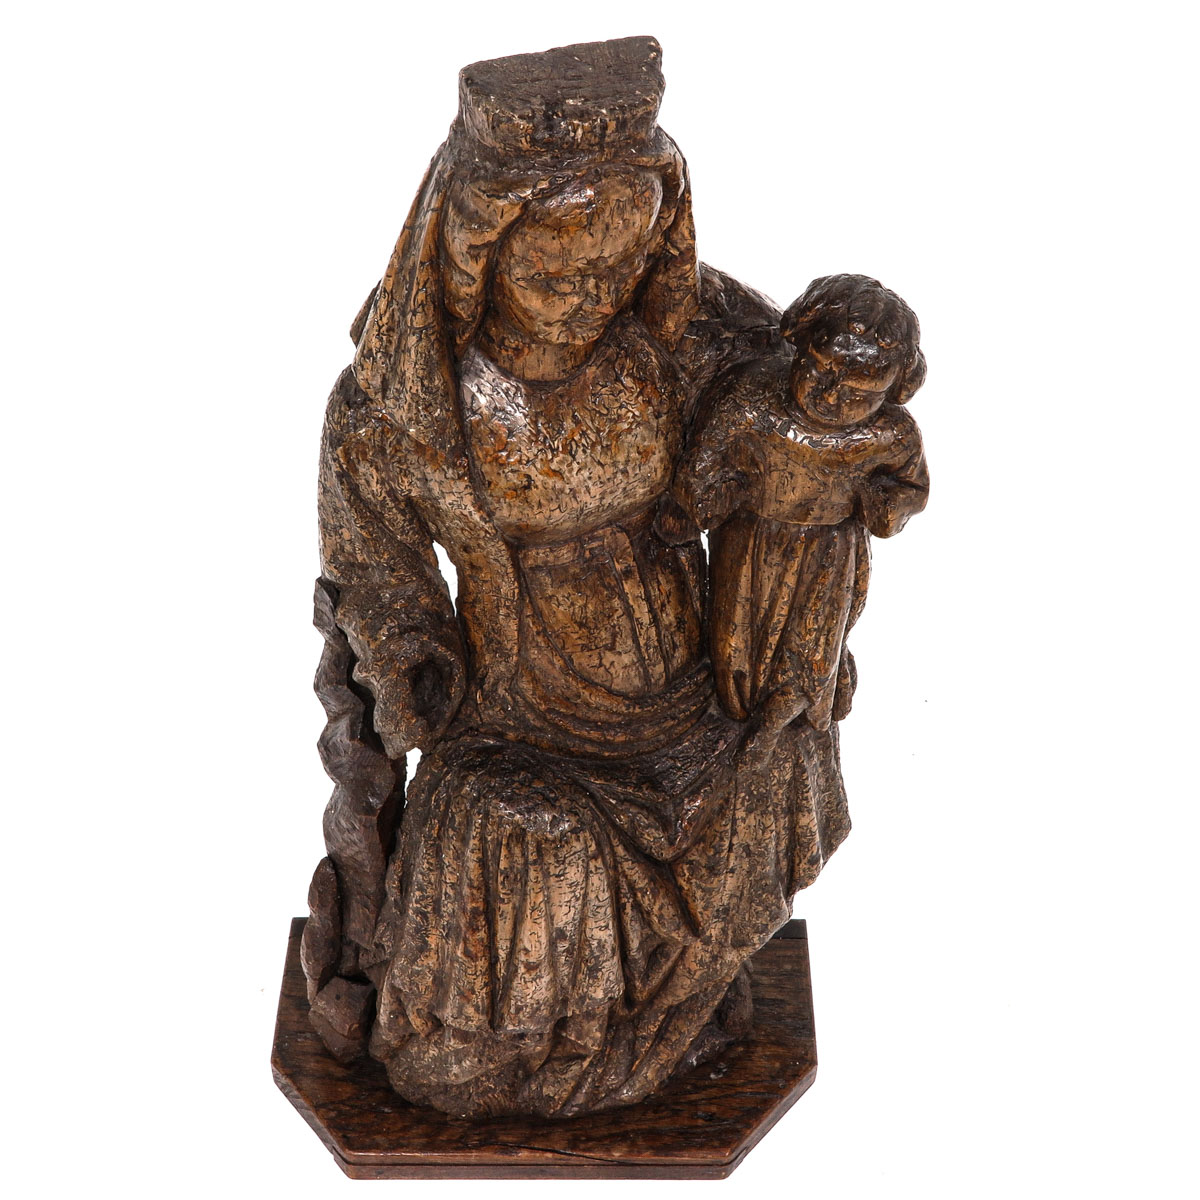 A 14th Century Sculpture of Madonna and Child - Image 5 of 10